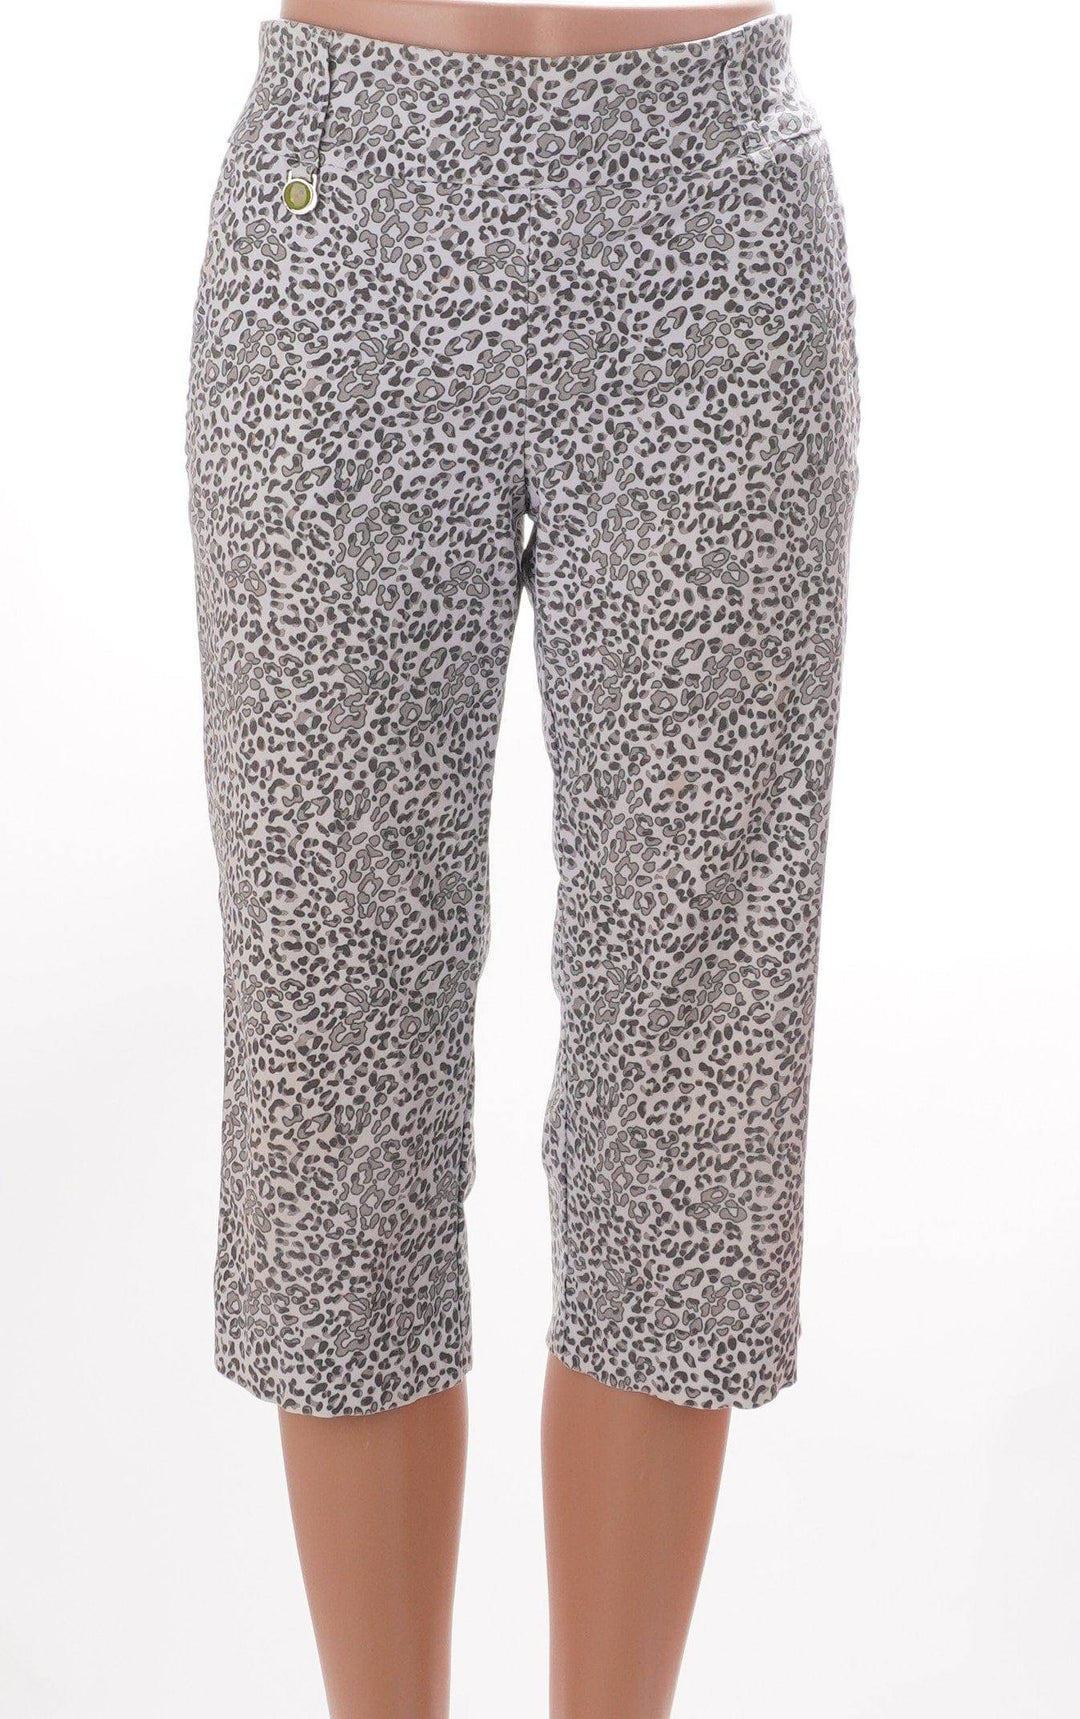 Swing Control Grey / 8 / Consigned Swing Control Pull Up Capri Pant - Grey Animal Print - Size 8